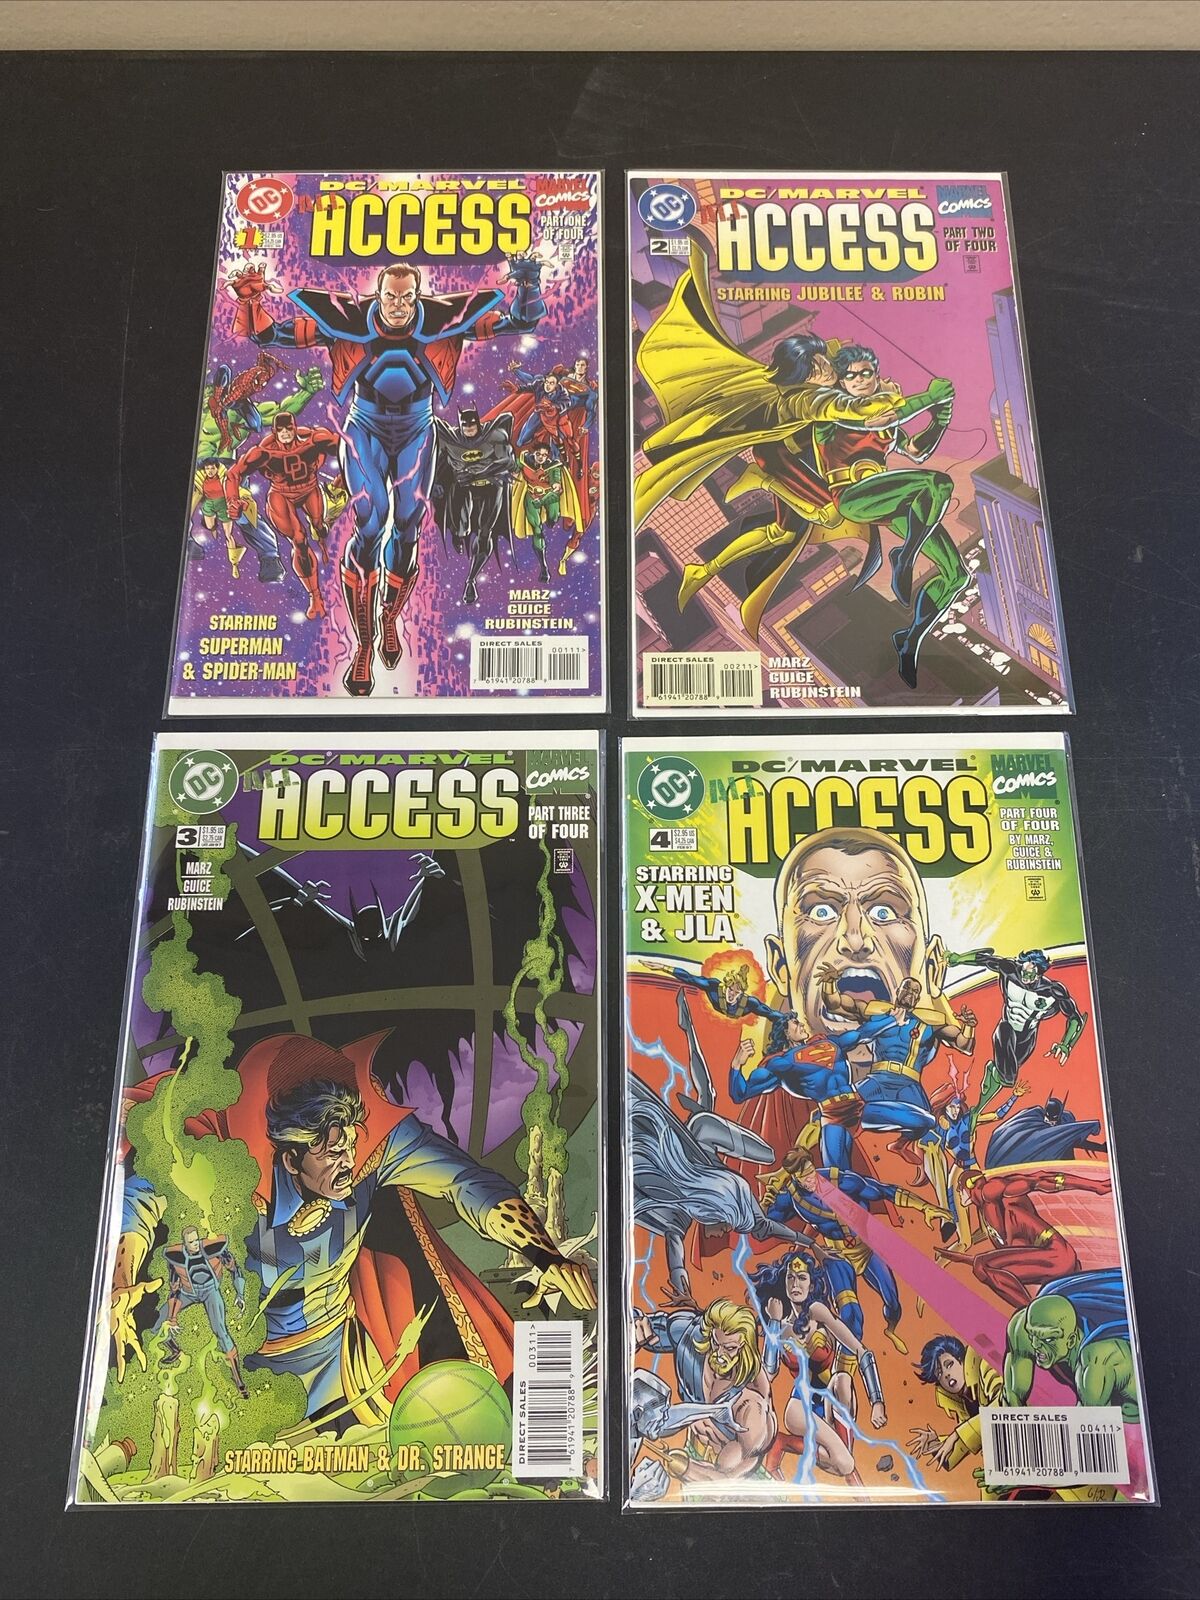 DC/MARVEL ALL ACCESS #1-4 Marvel & DC Crossover Event COMPLETE SERIES 